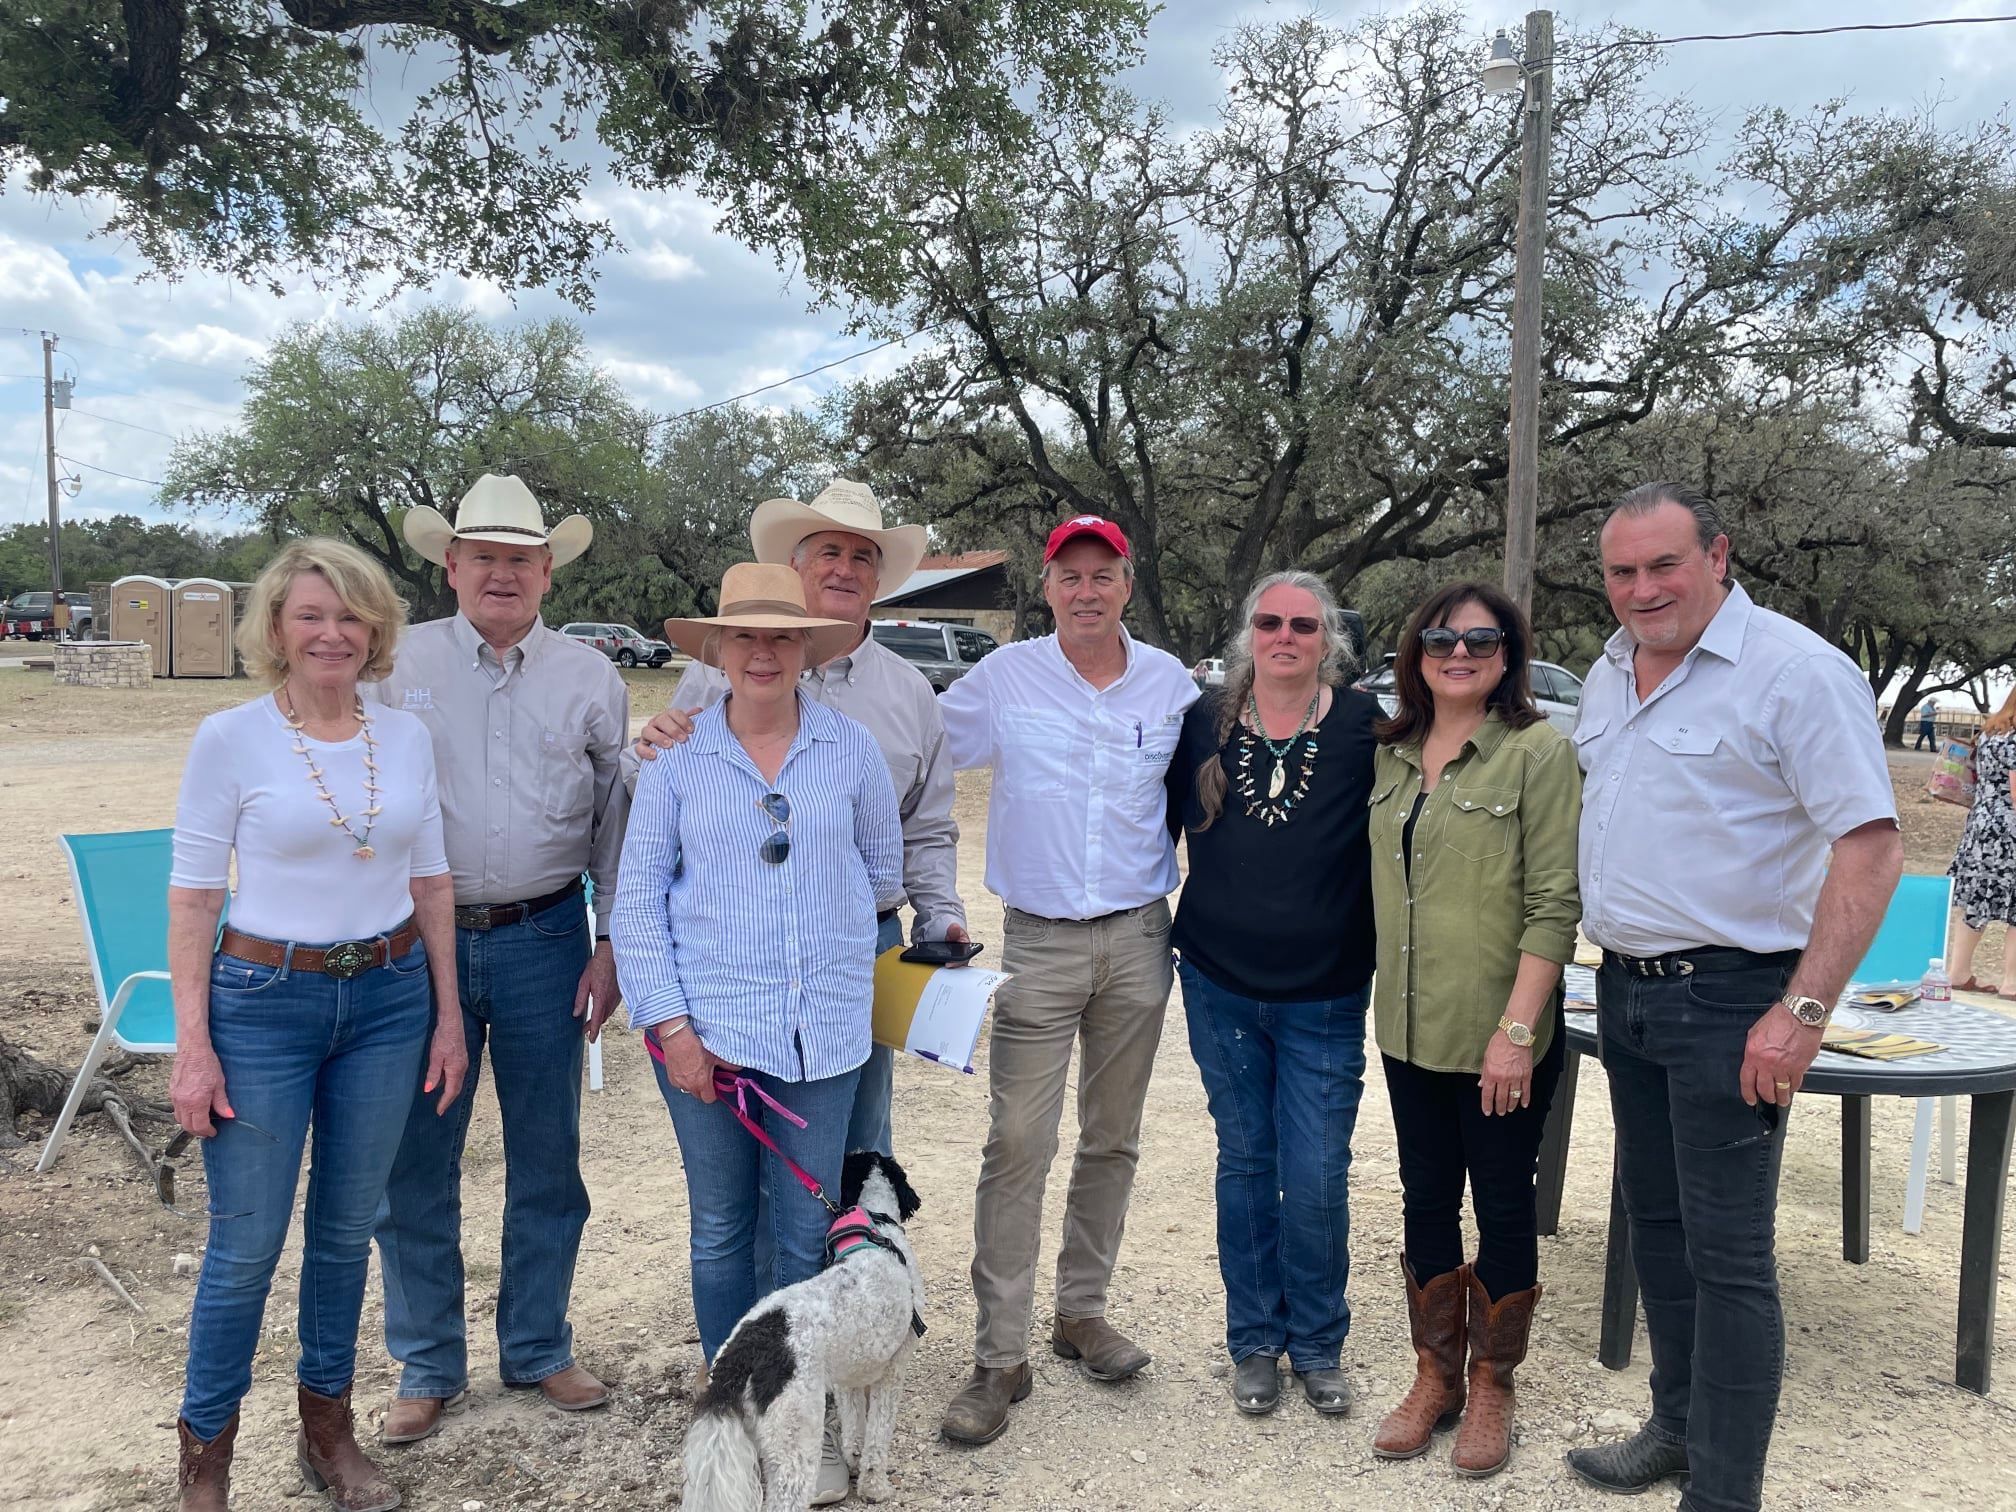 Sale Sponsors and Hired Hand Customers Chad Hutchinson,HH Cattle Co; John & Susie Hever, HL Longhorns- Mike Davis, LM Longhorns; Teresa Sparger, McCombs Ranches; and Sherese & Rex Glendenning, Glendenning Farms